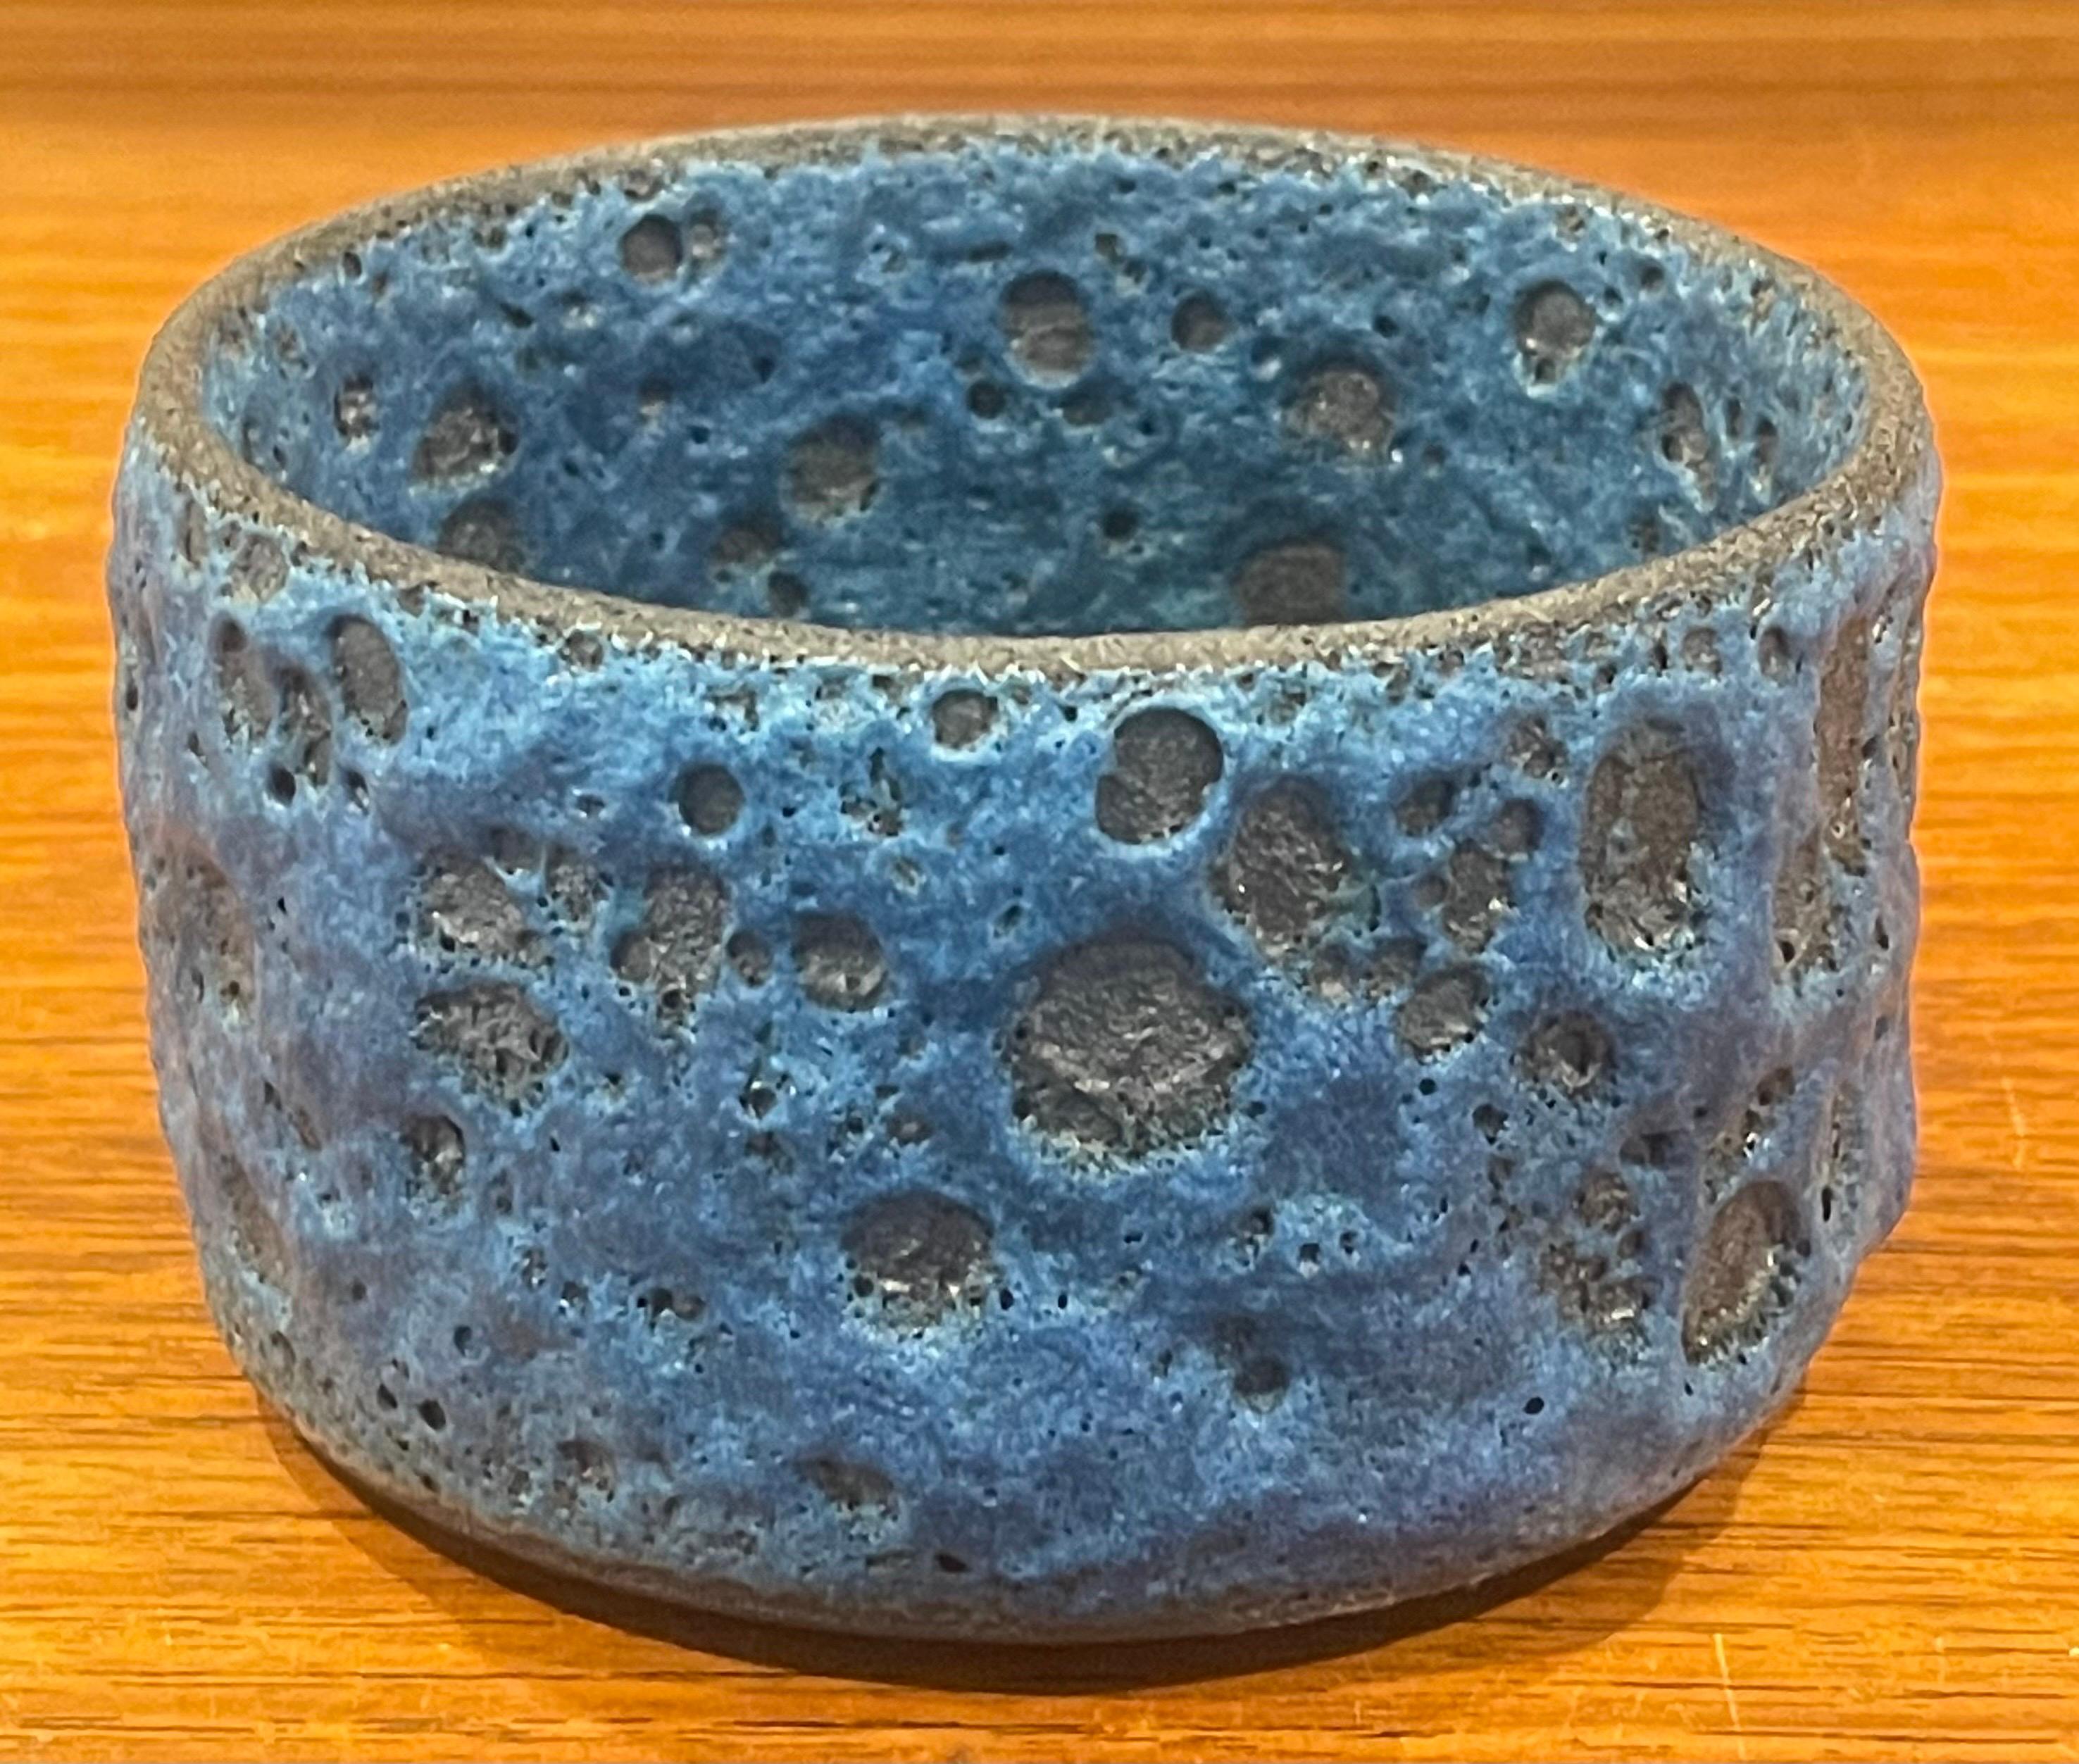 Petite mid-century blue lava glazed bowl, circa 1970s. The piece is in very good vintage condition with no chips or cracks and measures 4.5